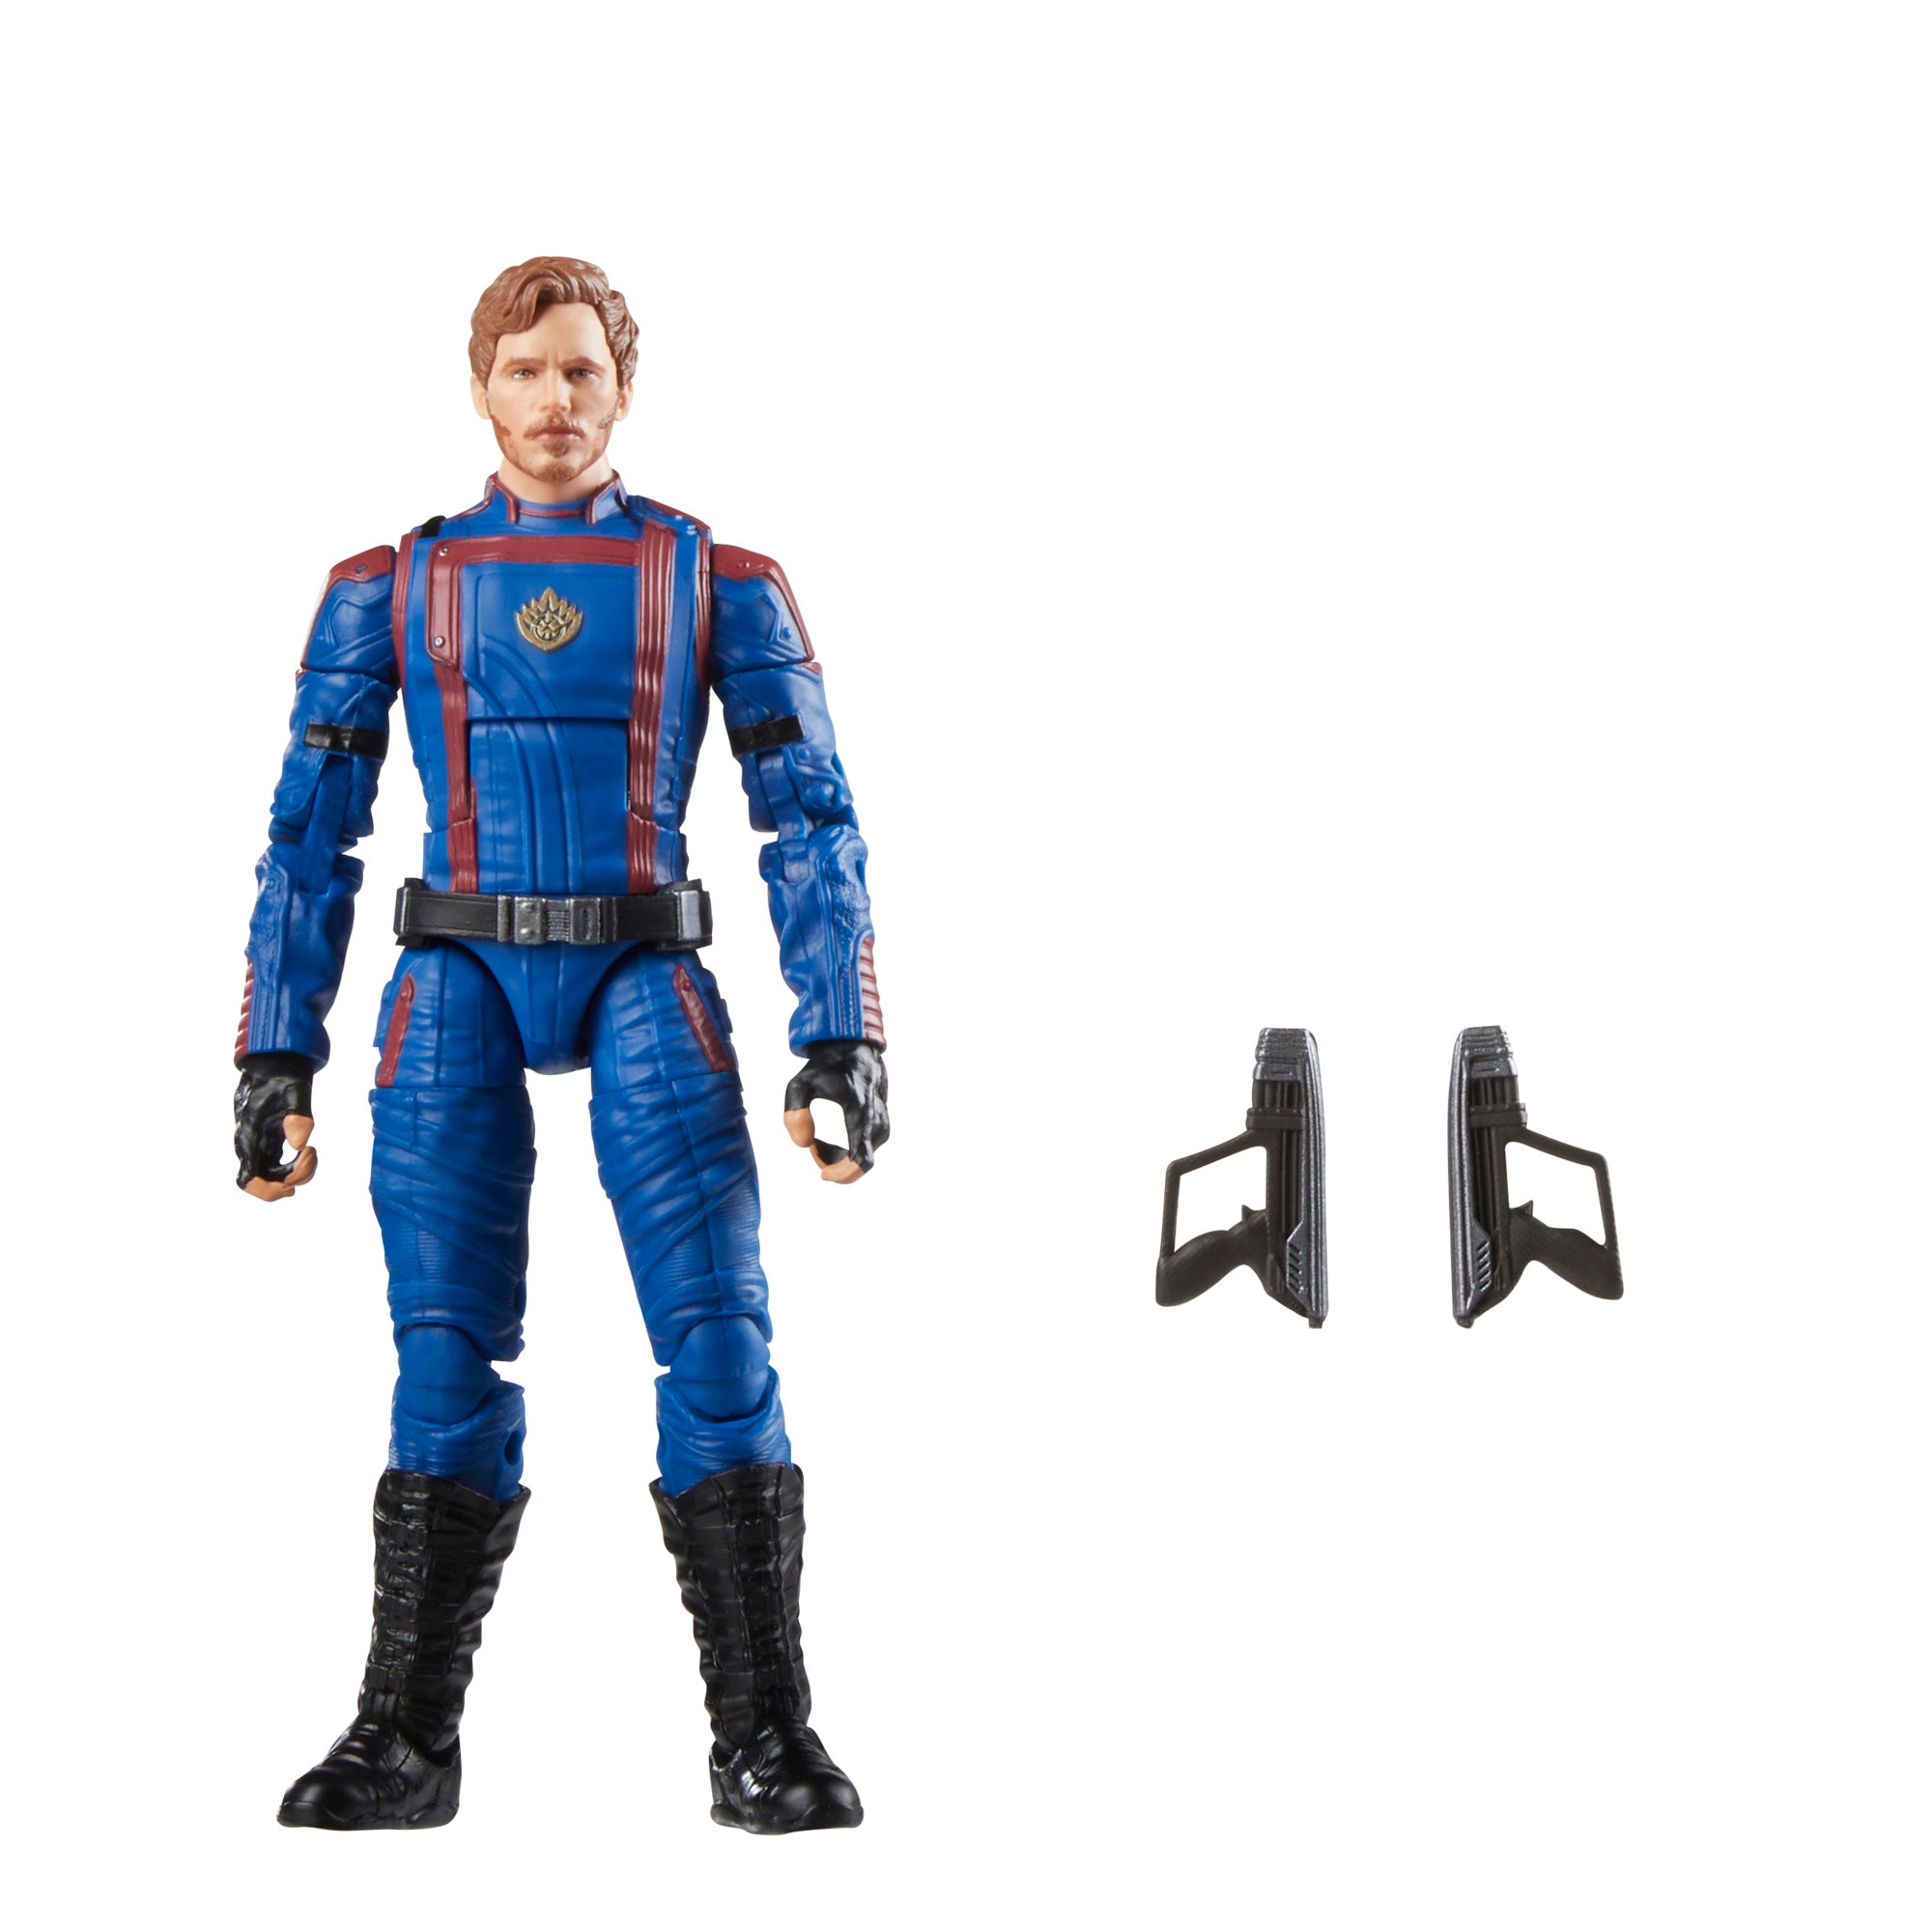 Marvel Legends Series Star-Lord, Guardians of the Galaxy Vol